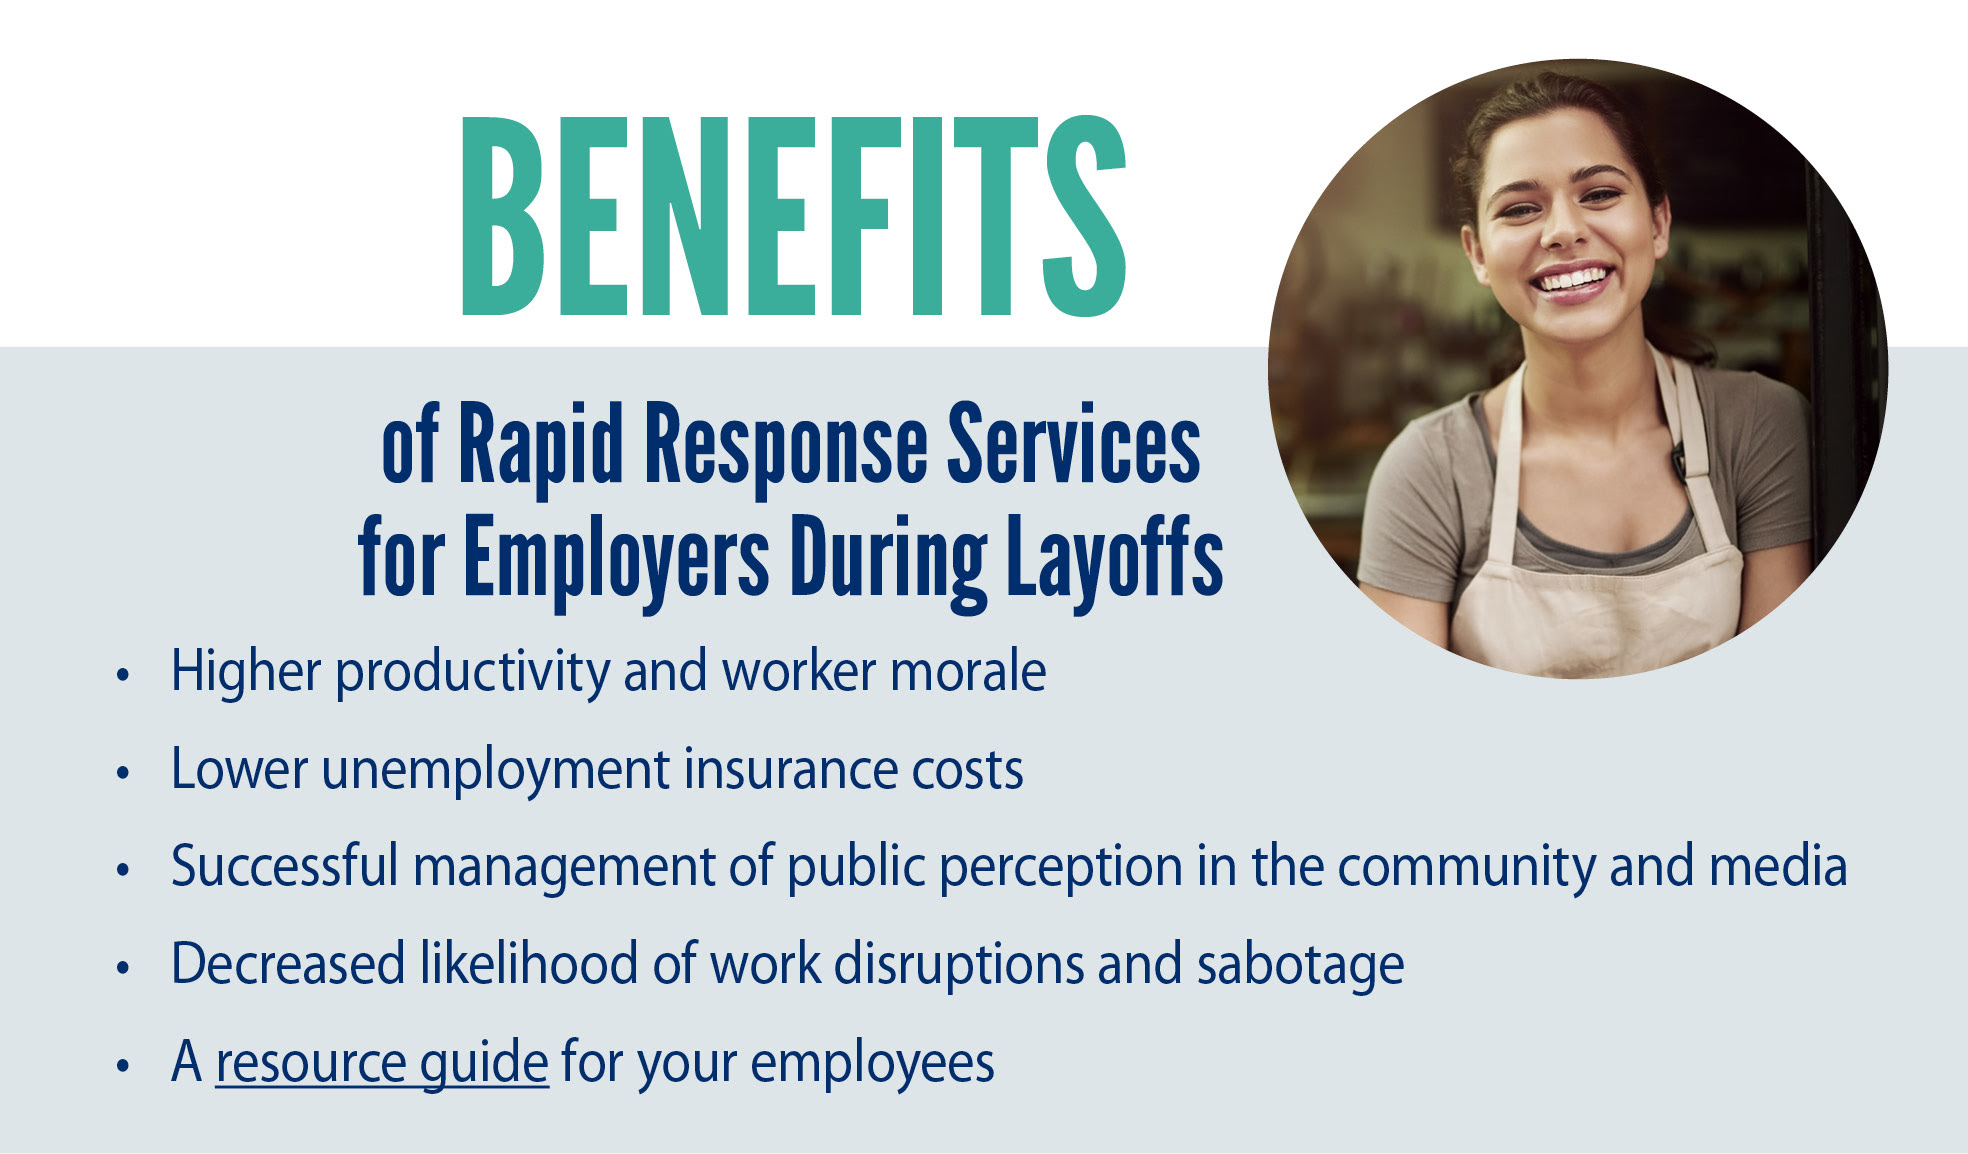 Benefits of Rapid Response Services for Employers During Layoffs. Higher productivity and worker morale. Lower unemployment insurance costs. Successful managementof public perception in the community and the media. Decreased likelihood of work disruptions and sabotage.  A resource guide for your employees.